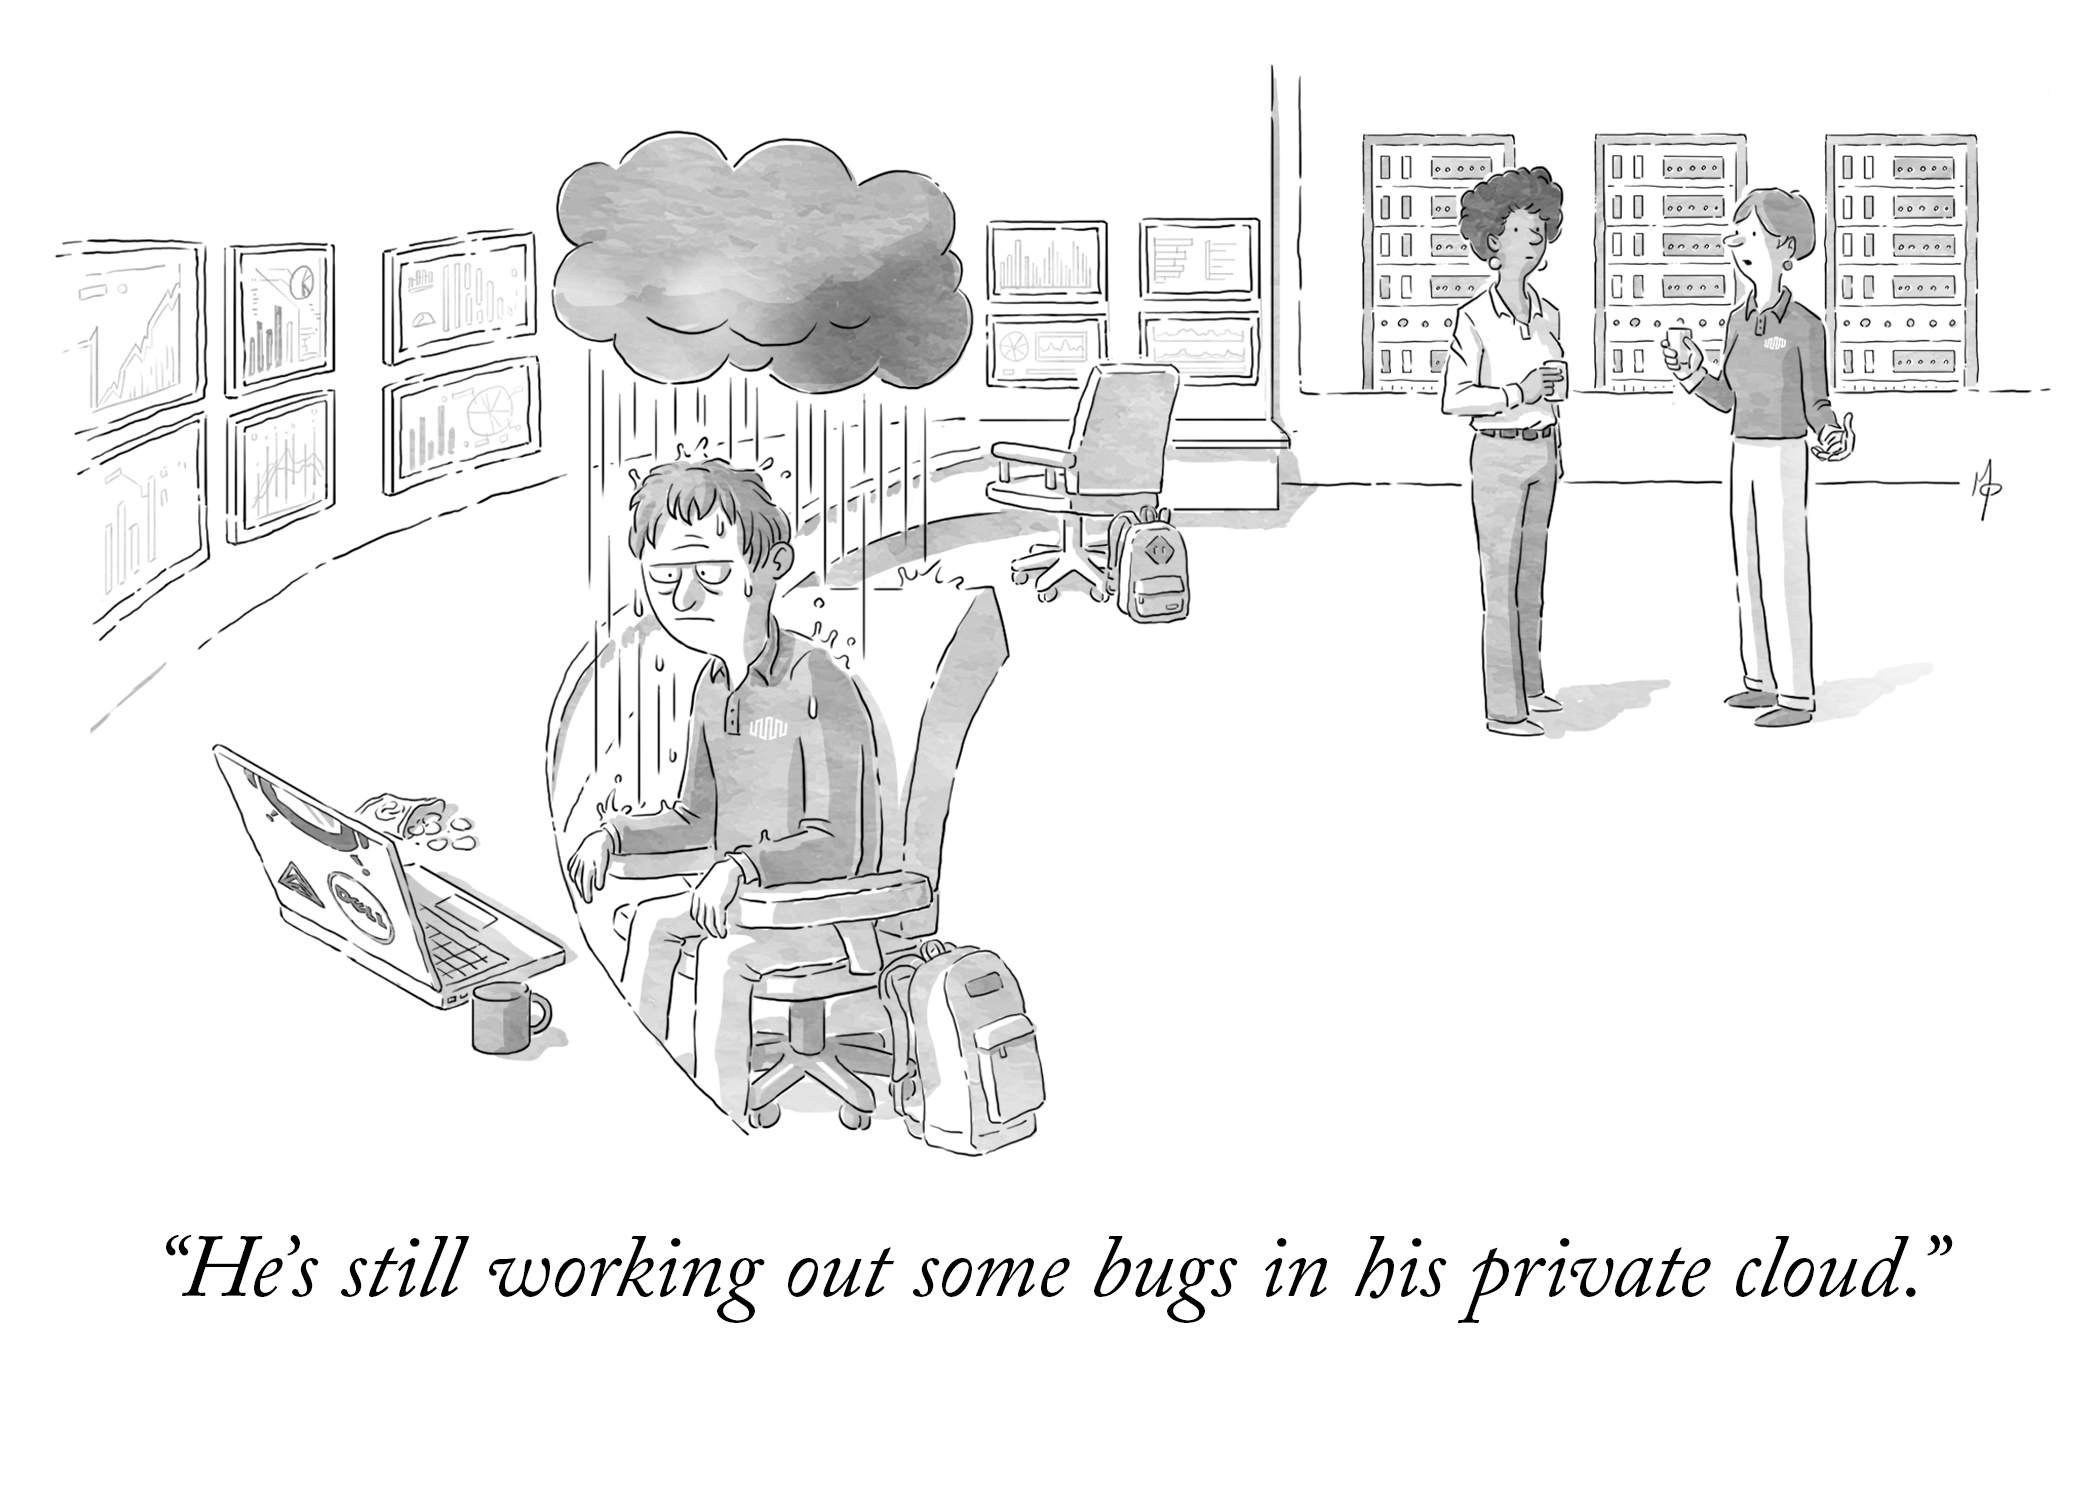 New Yorker style illustration. Two female characters are having a conversation behind a man sat at a desk with a laptop looking miserable. Above his head is a small, personal rain cloud, pouring rain down upon him. The caption reads: He's still working out some bugs in his private cloud.